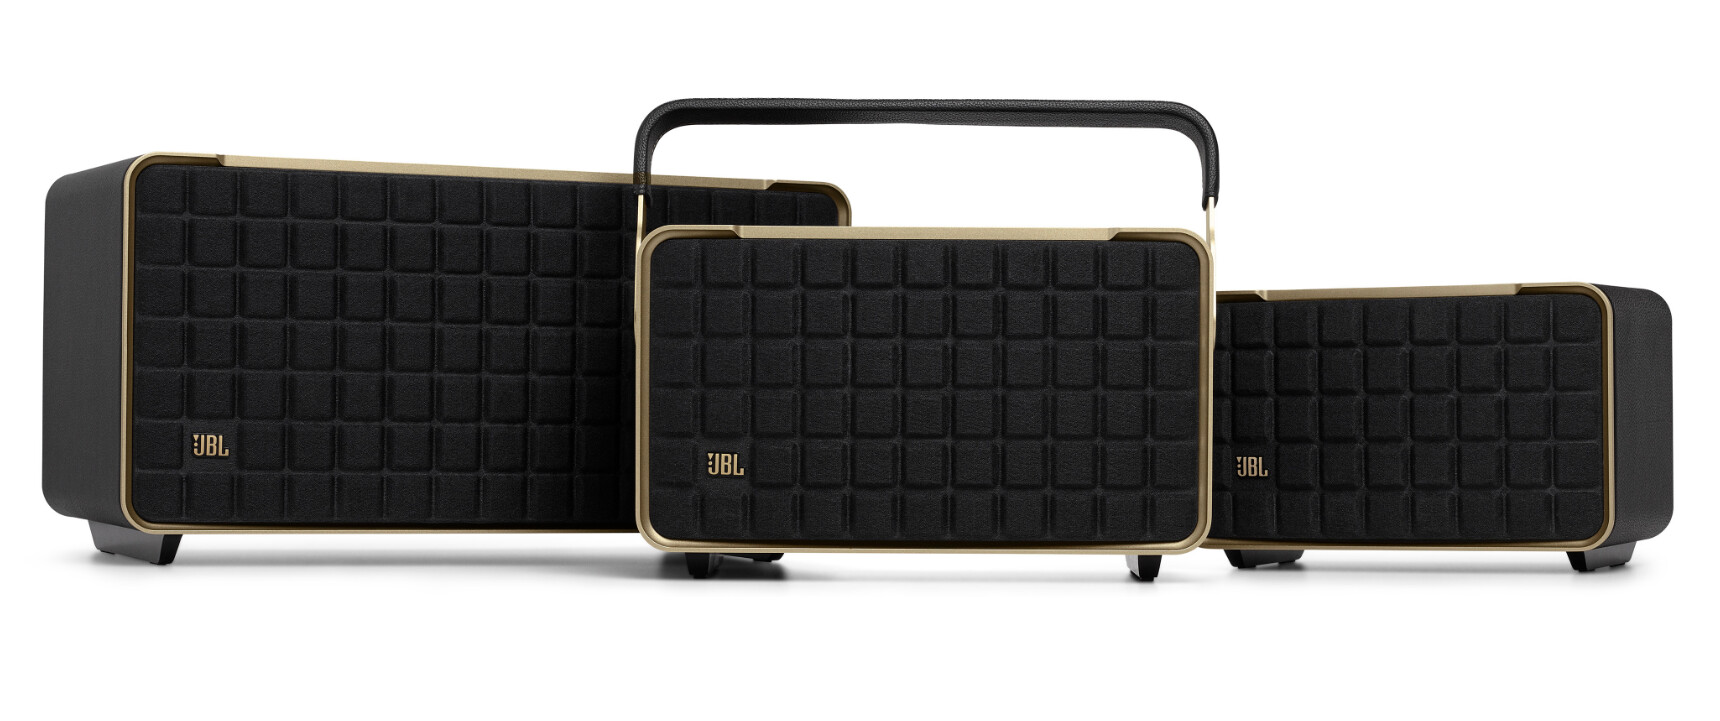 JBL launches new retro Wi-Fi speaker line with Alexa and Google Assistant